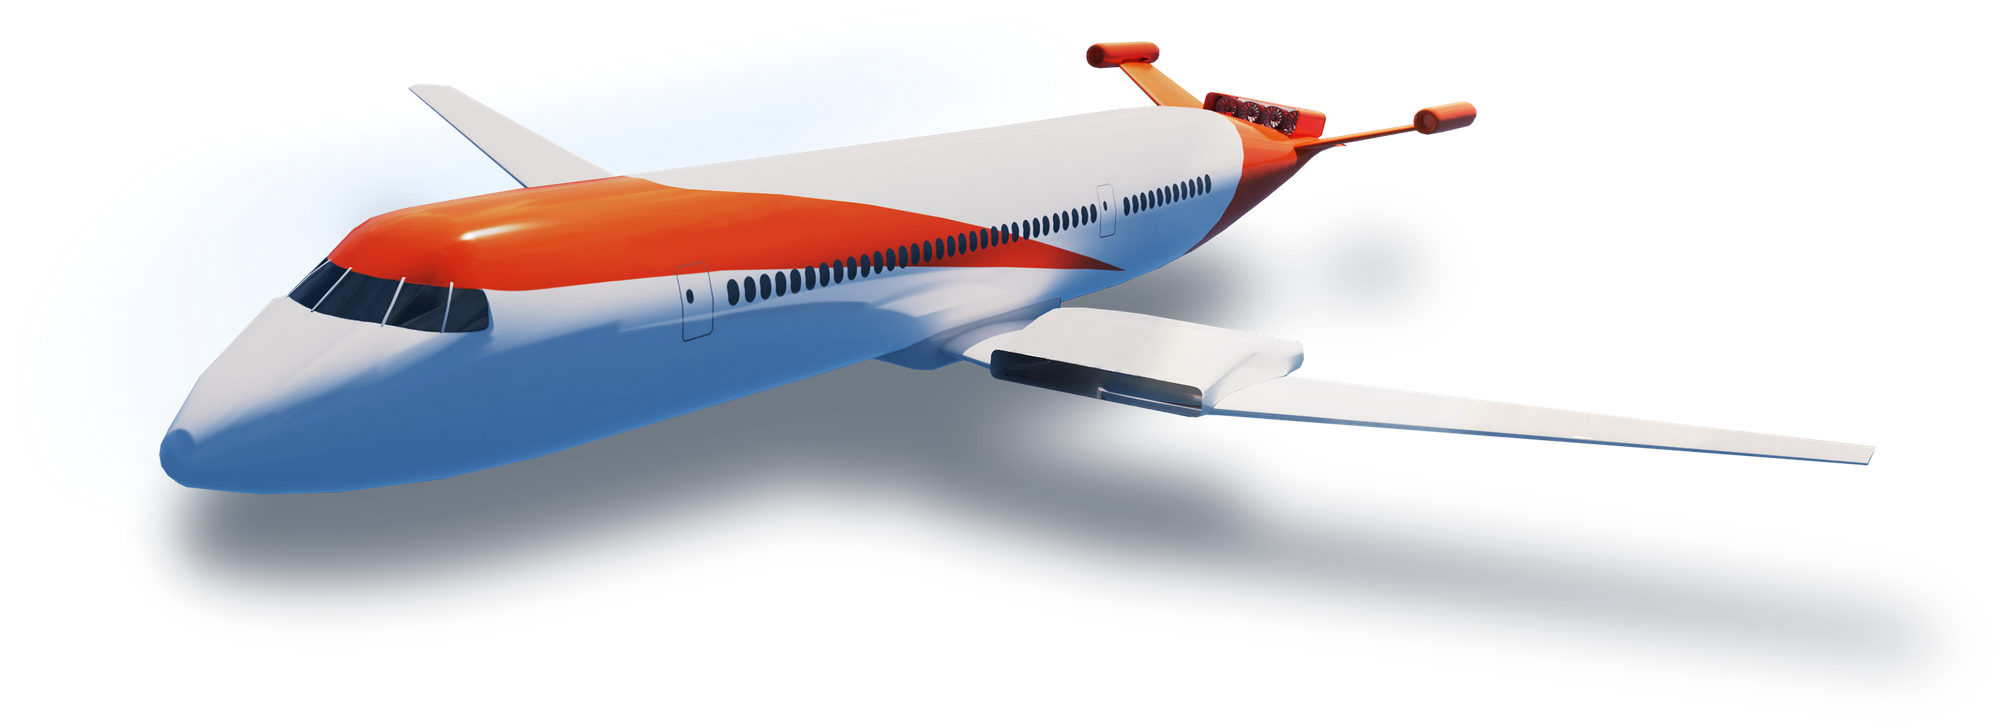 CG rendering of an airplane using Wright's engines